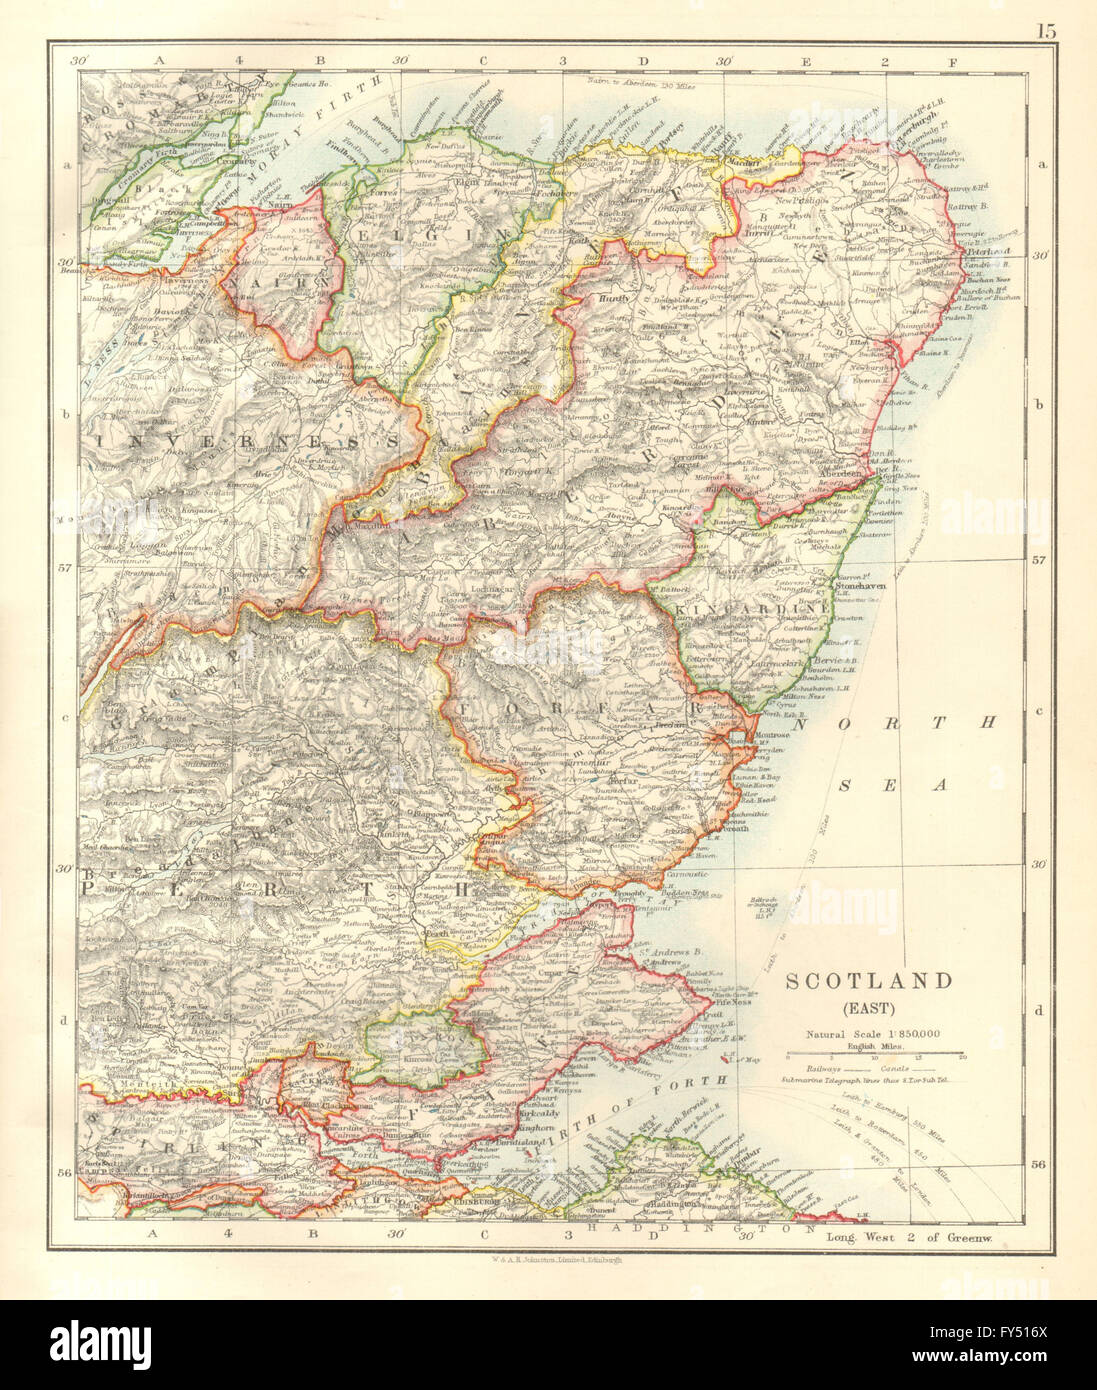 SCOTLAND EAST. Grampian Tayside Fife Firth of Forth Aberdeen. JOHNSTON, 1920 map Stock Photo